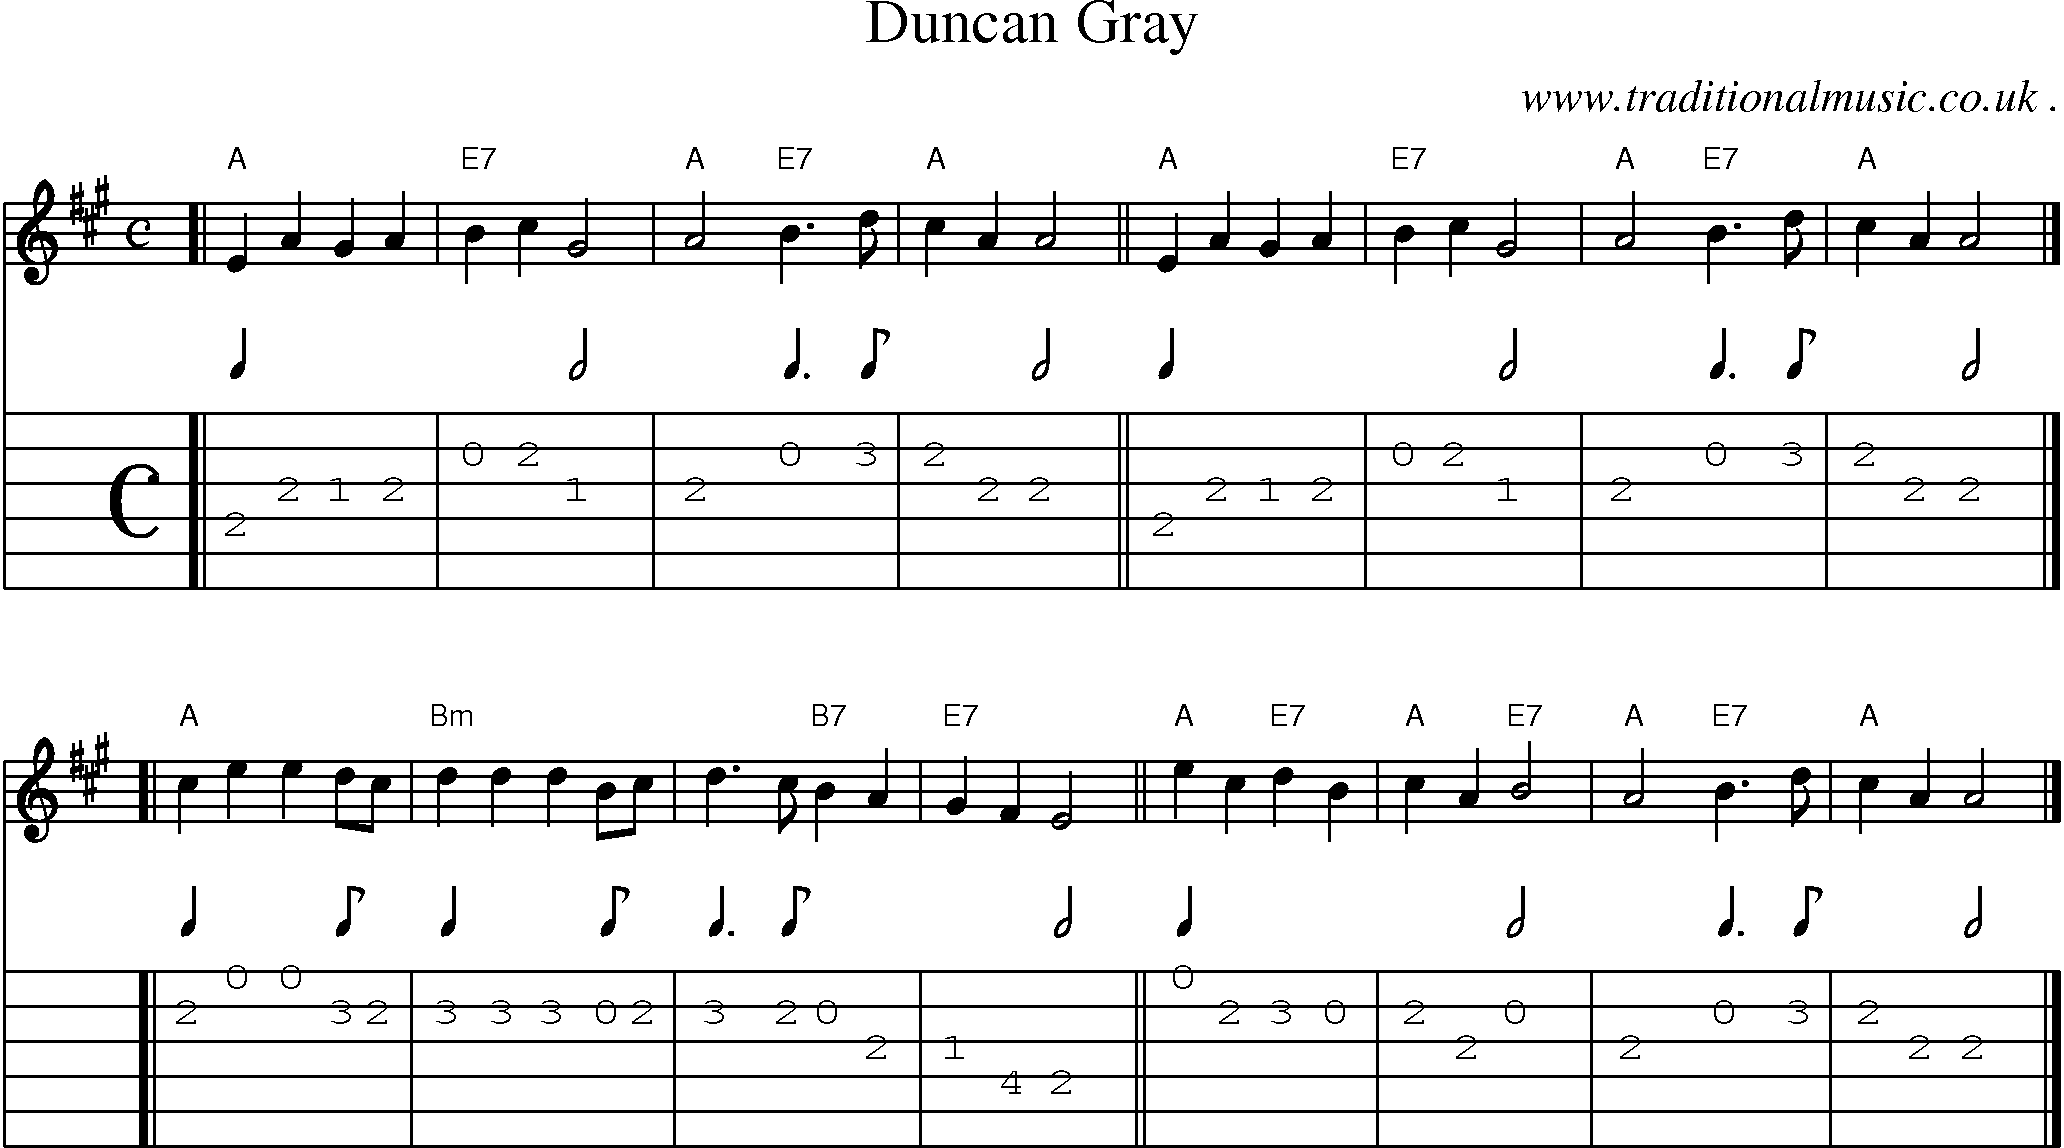 Sheet-music  score, Chords and Guitar Tabs for Duncan Gray